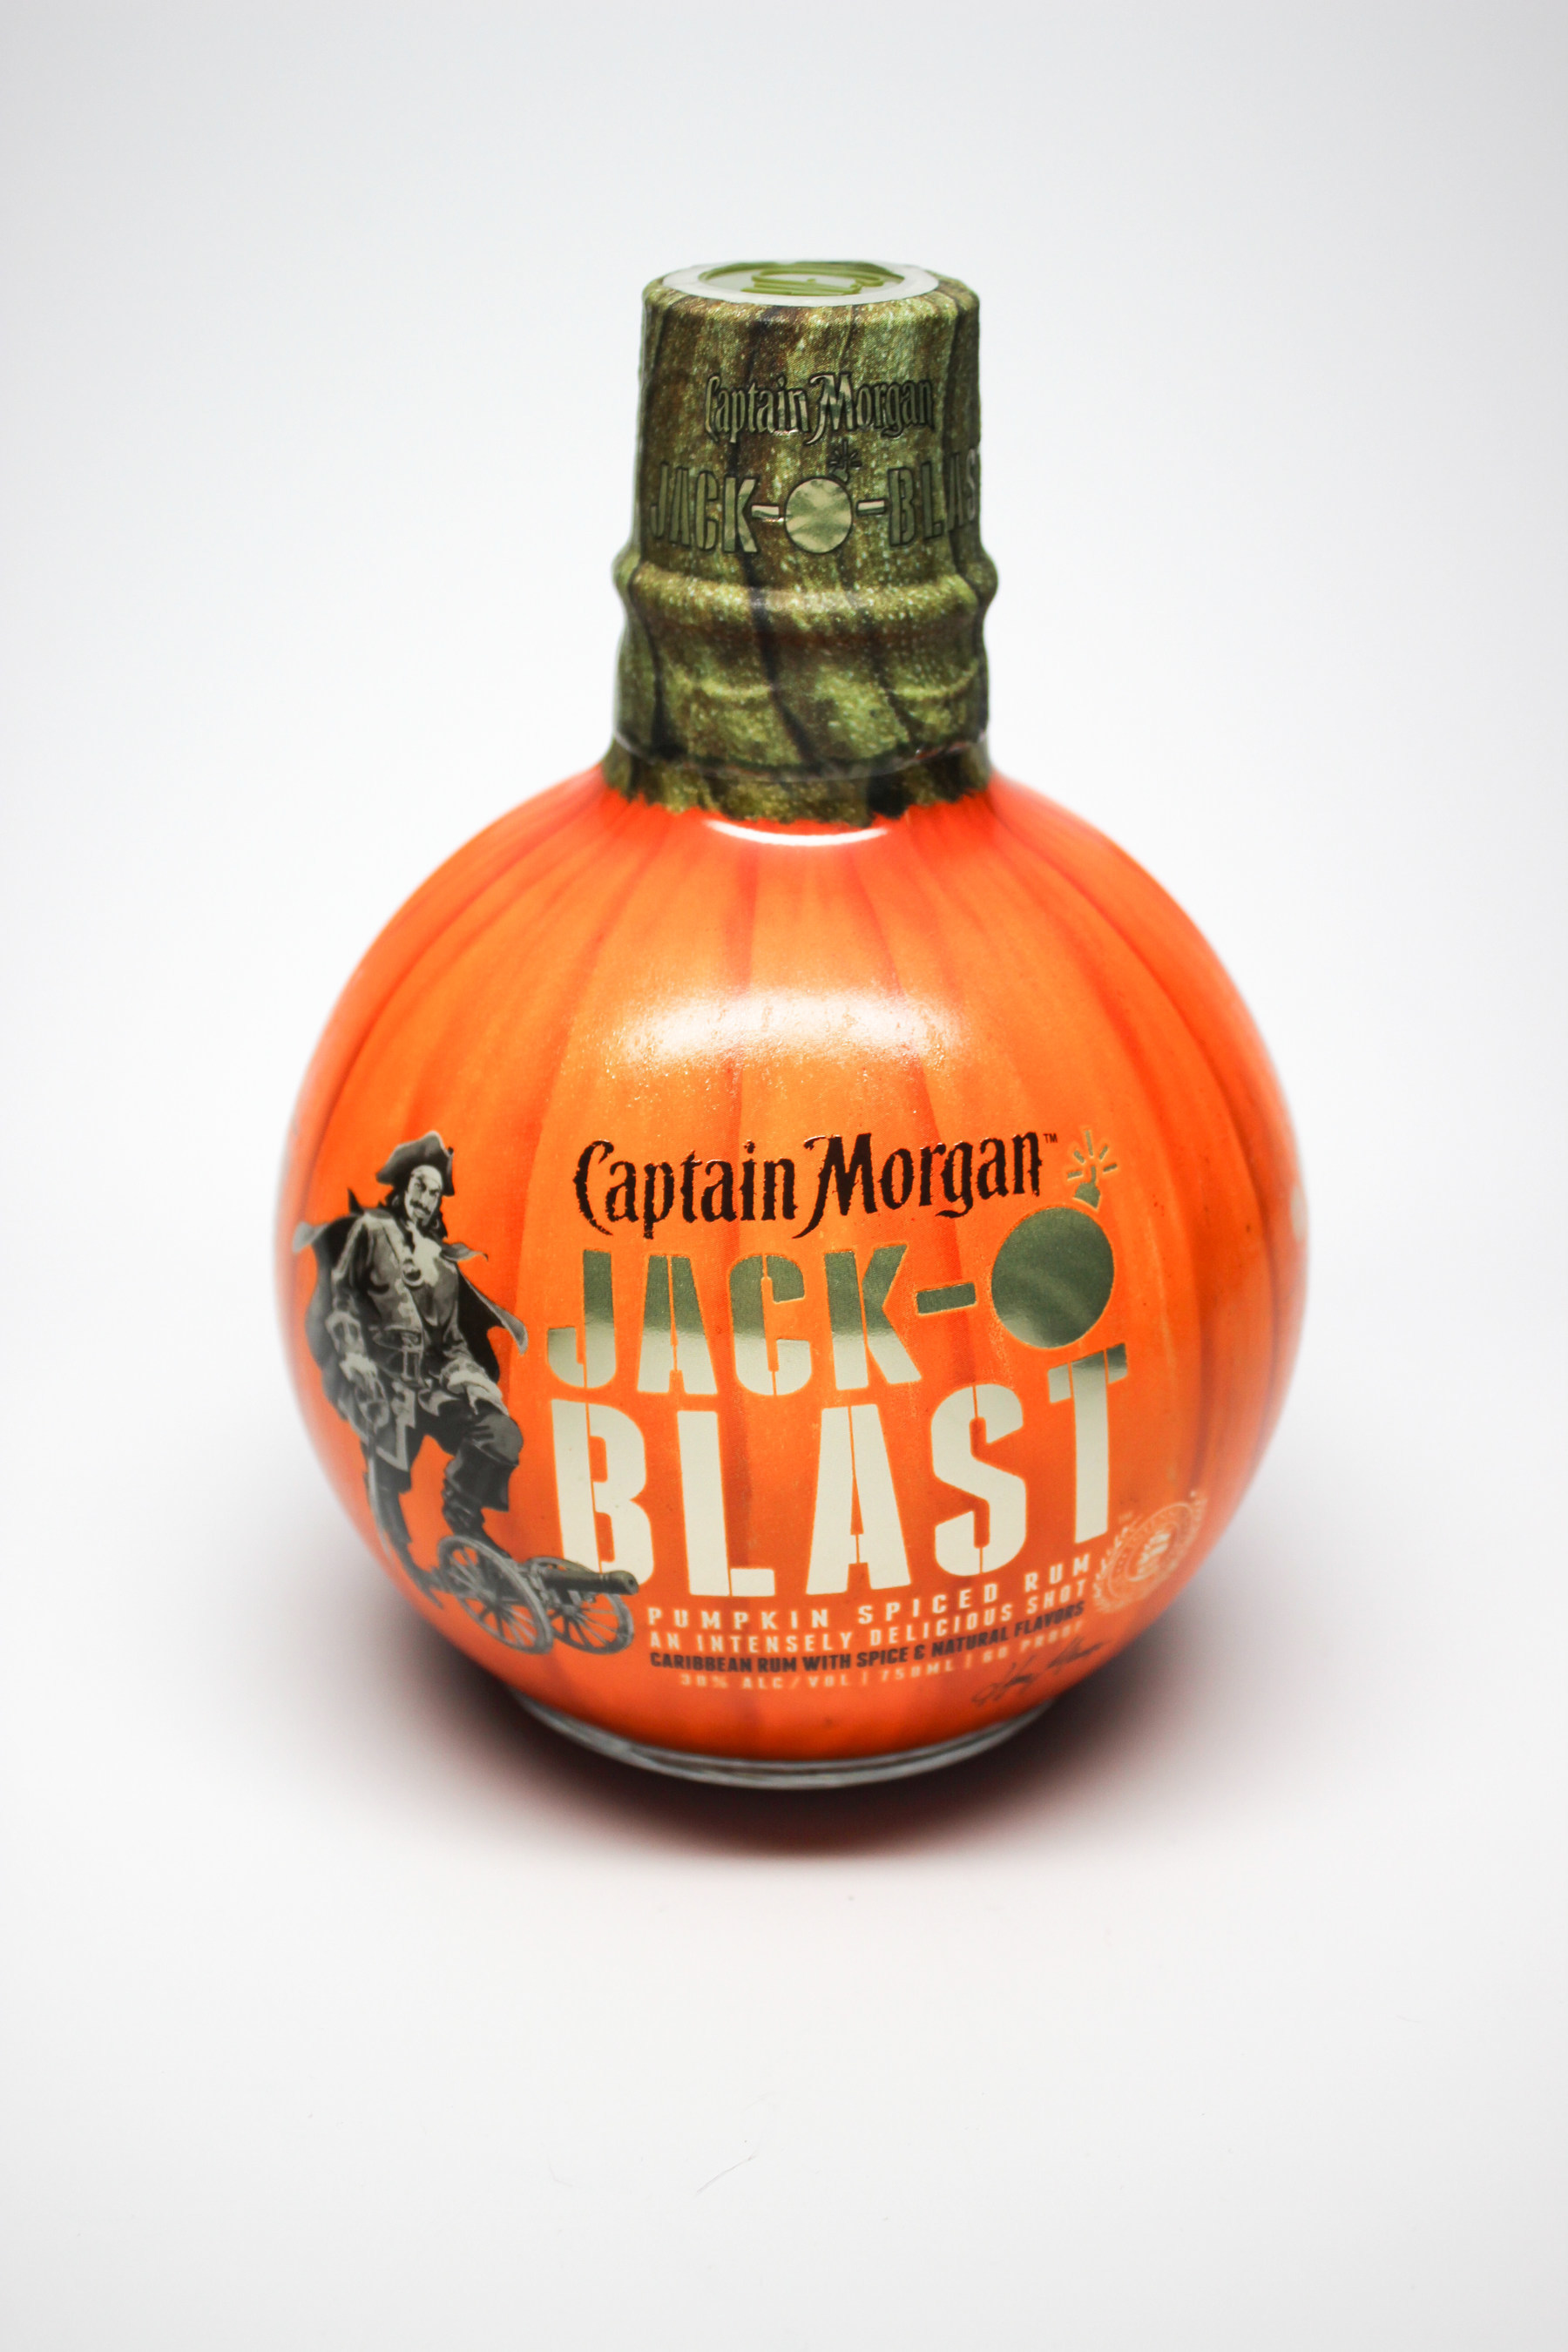 Just When You Thought Pumpkin Spice Couldn't Get Any Better - Captain Morgan Jack-O'Blast Has Arrived